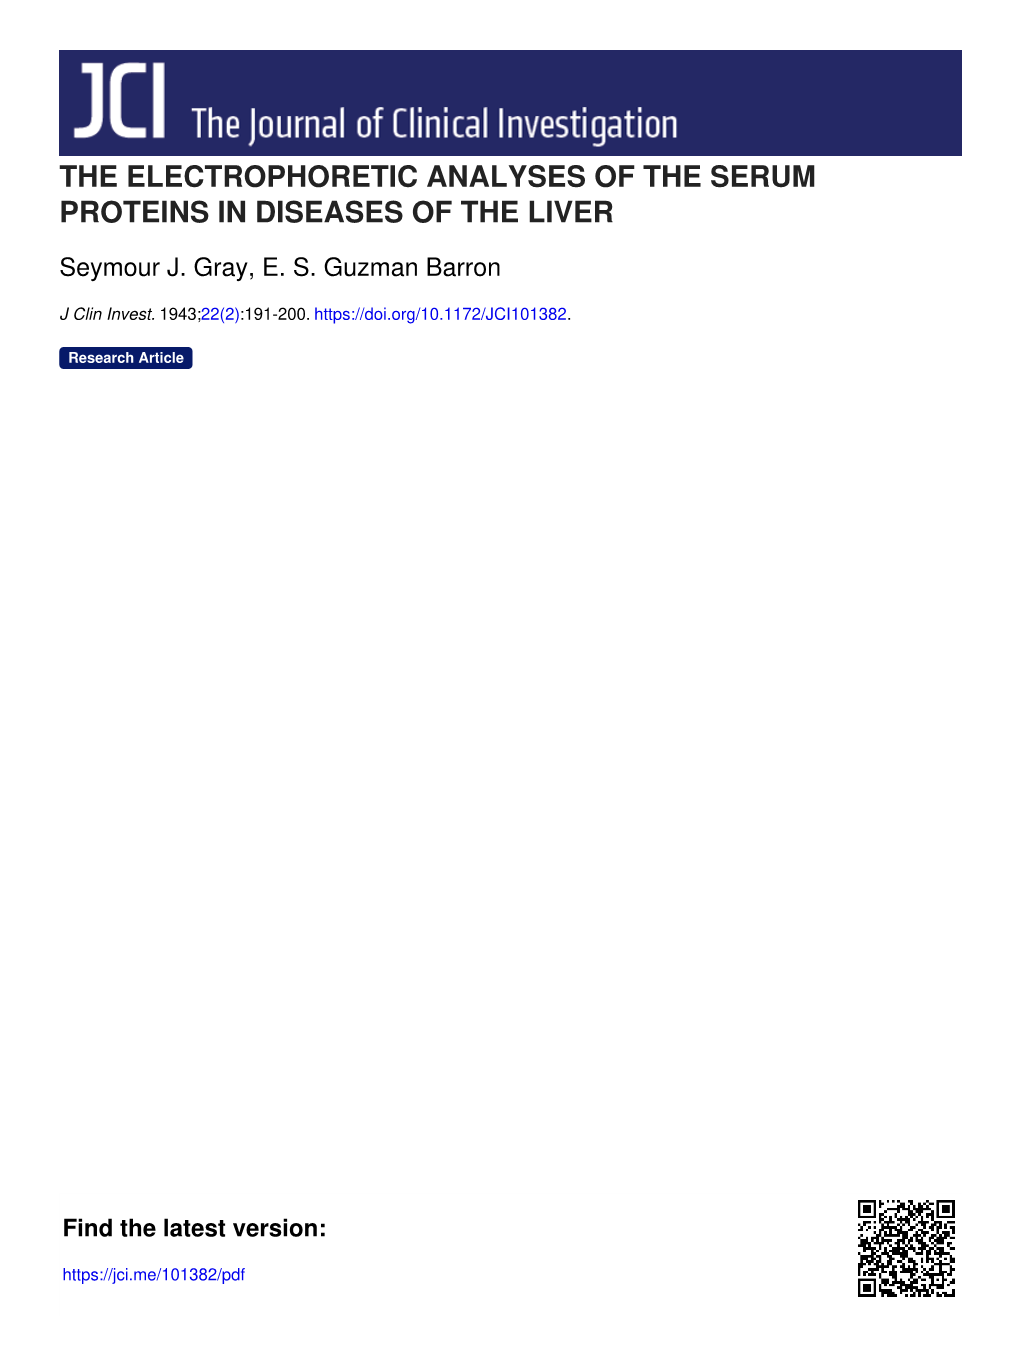 The Electrophoretic Analyses of the Serum Proteins in Diseases of the Liver